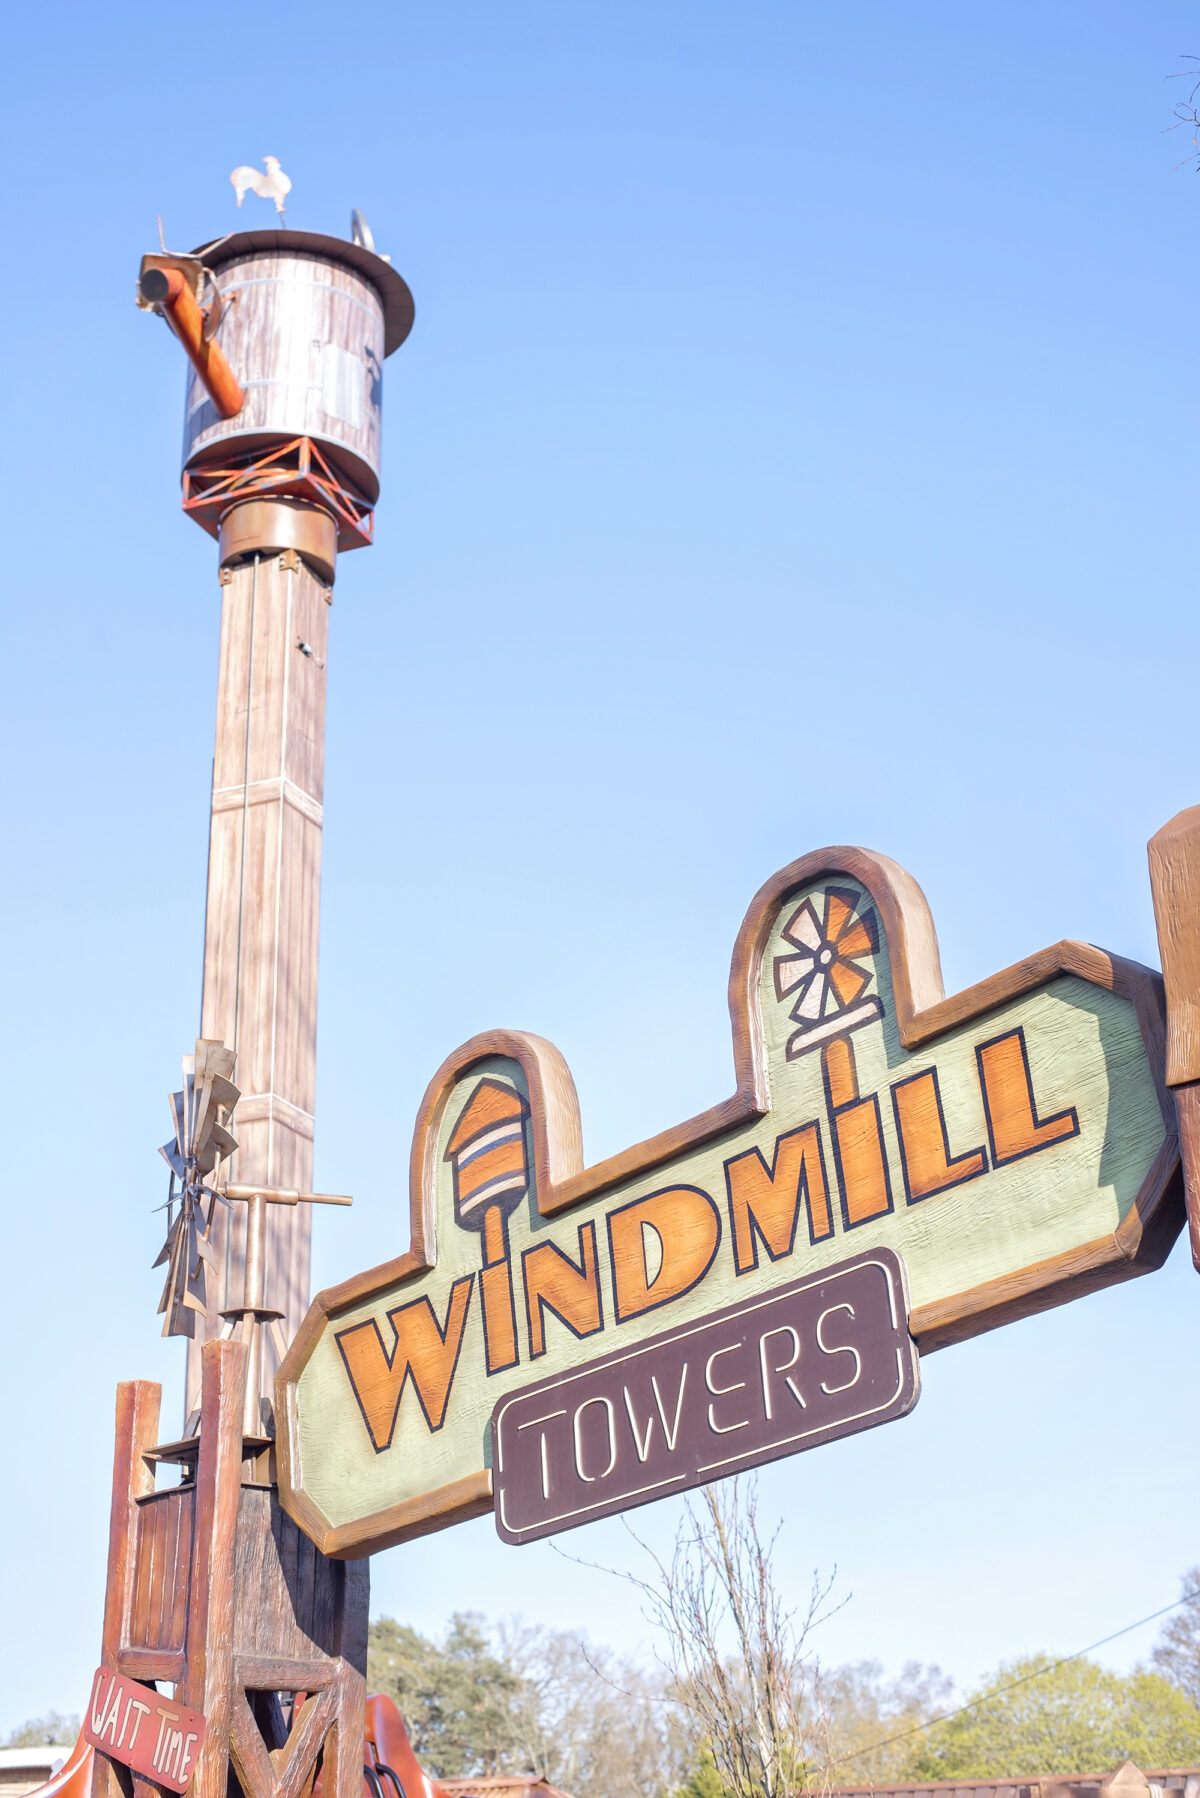 Image shows the signage for the Windmill Falls ride at Tornado Springs, Paultons Park, Hampshire.